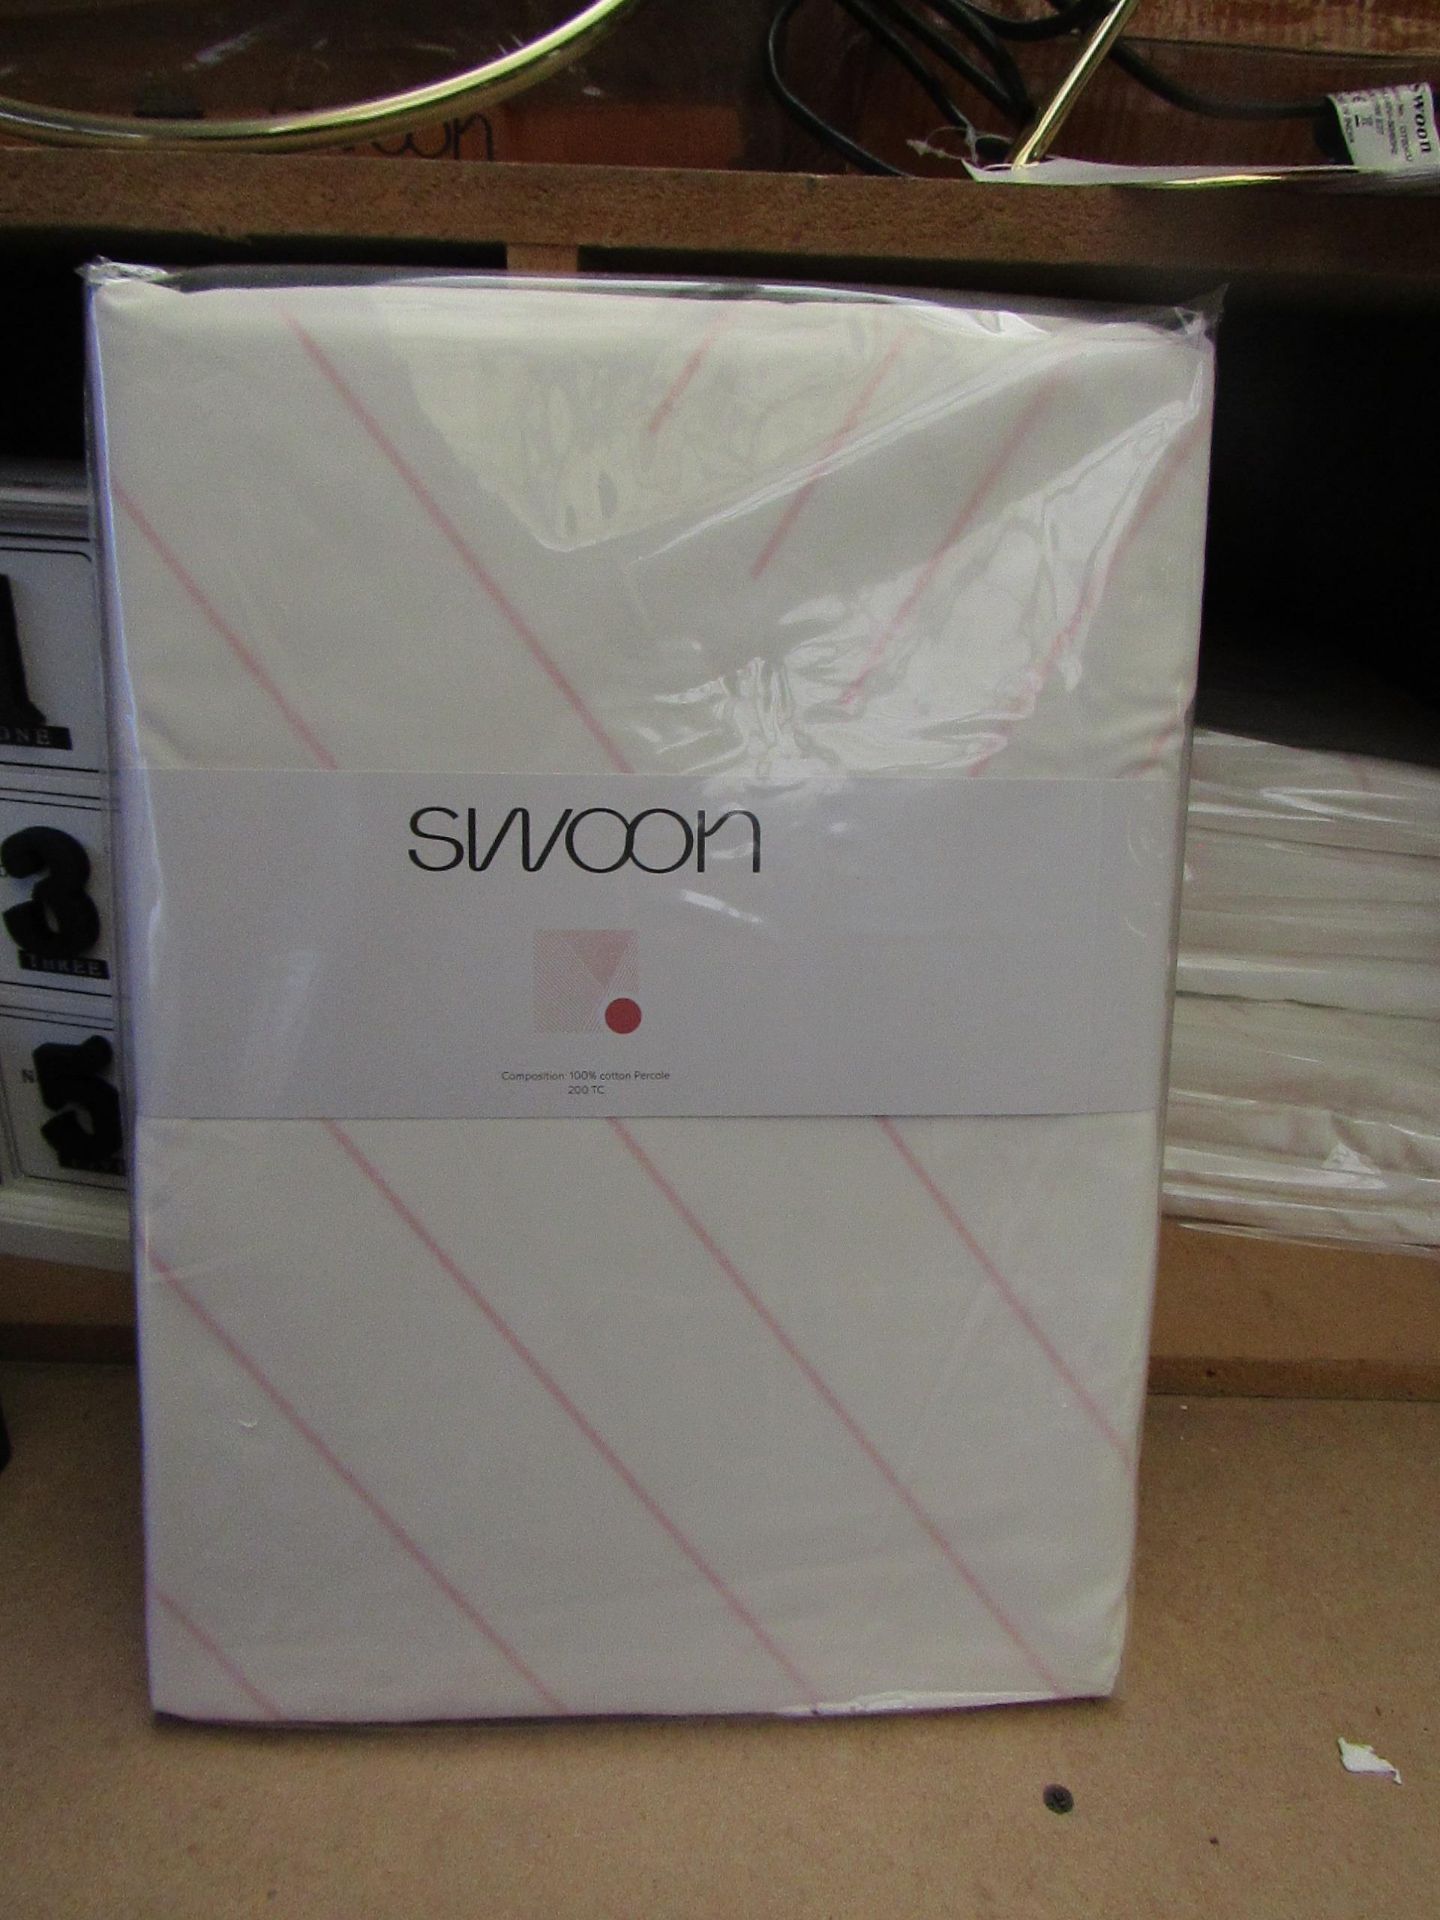 | 1X | SWOON BOOLE PINK KING SIZE DUVET COVER SET, INCLUDES DUVET COVER AND 2 MATCHING PILLOW